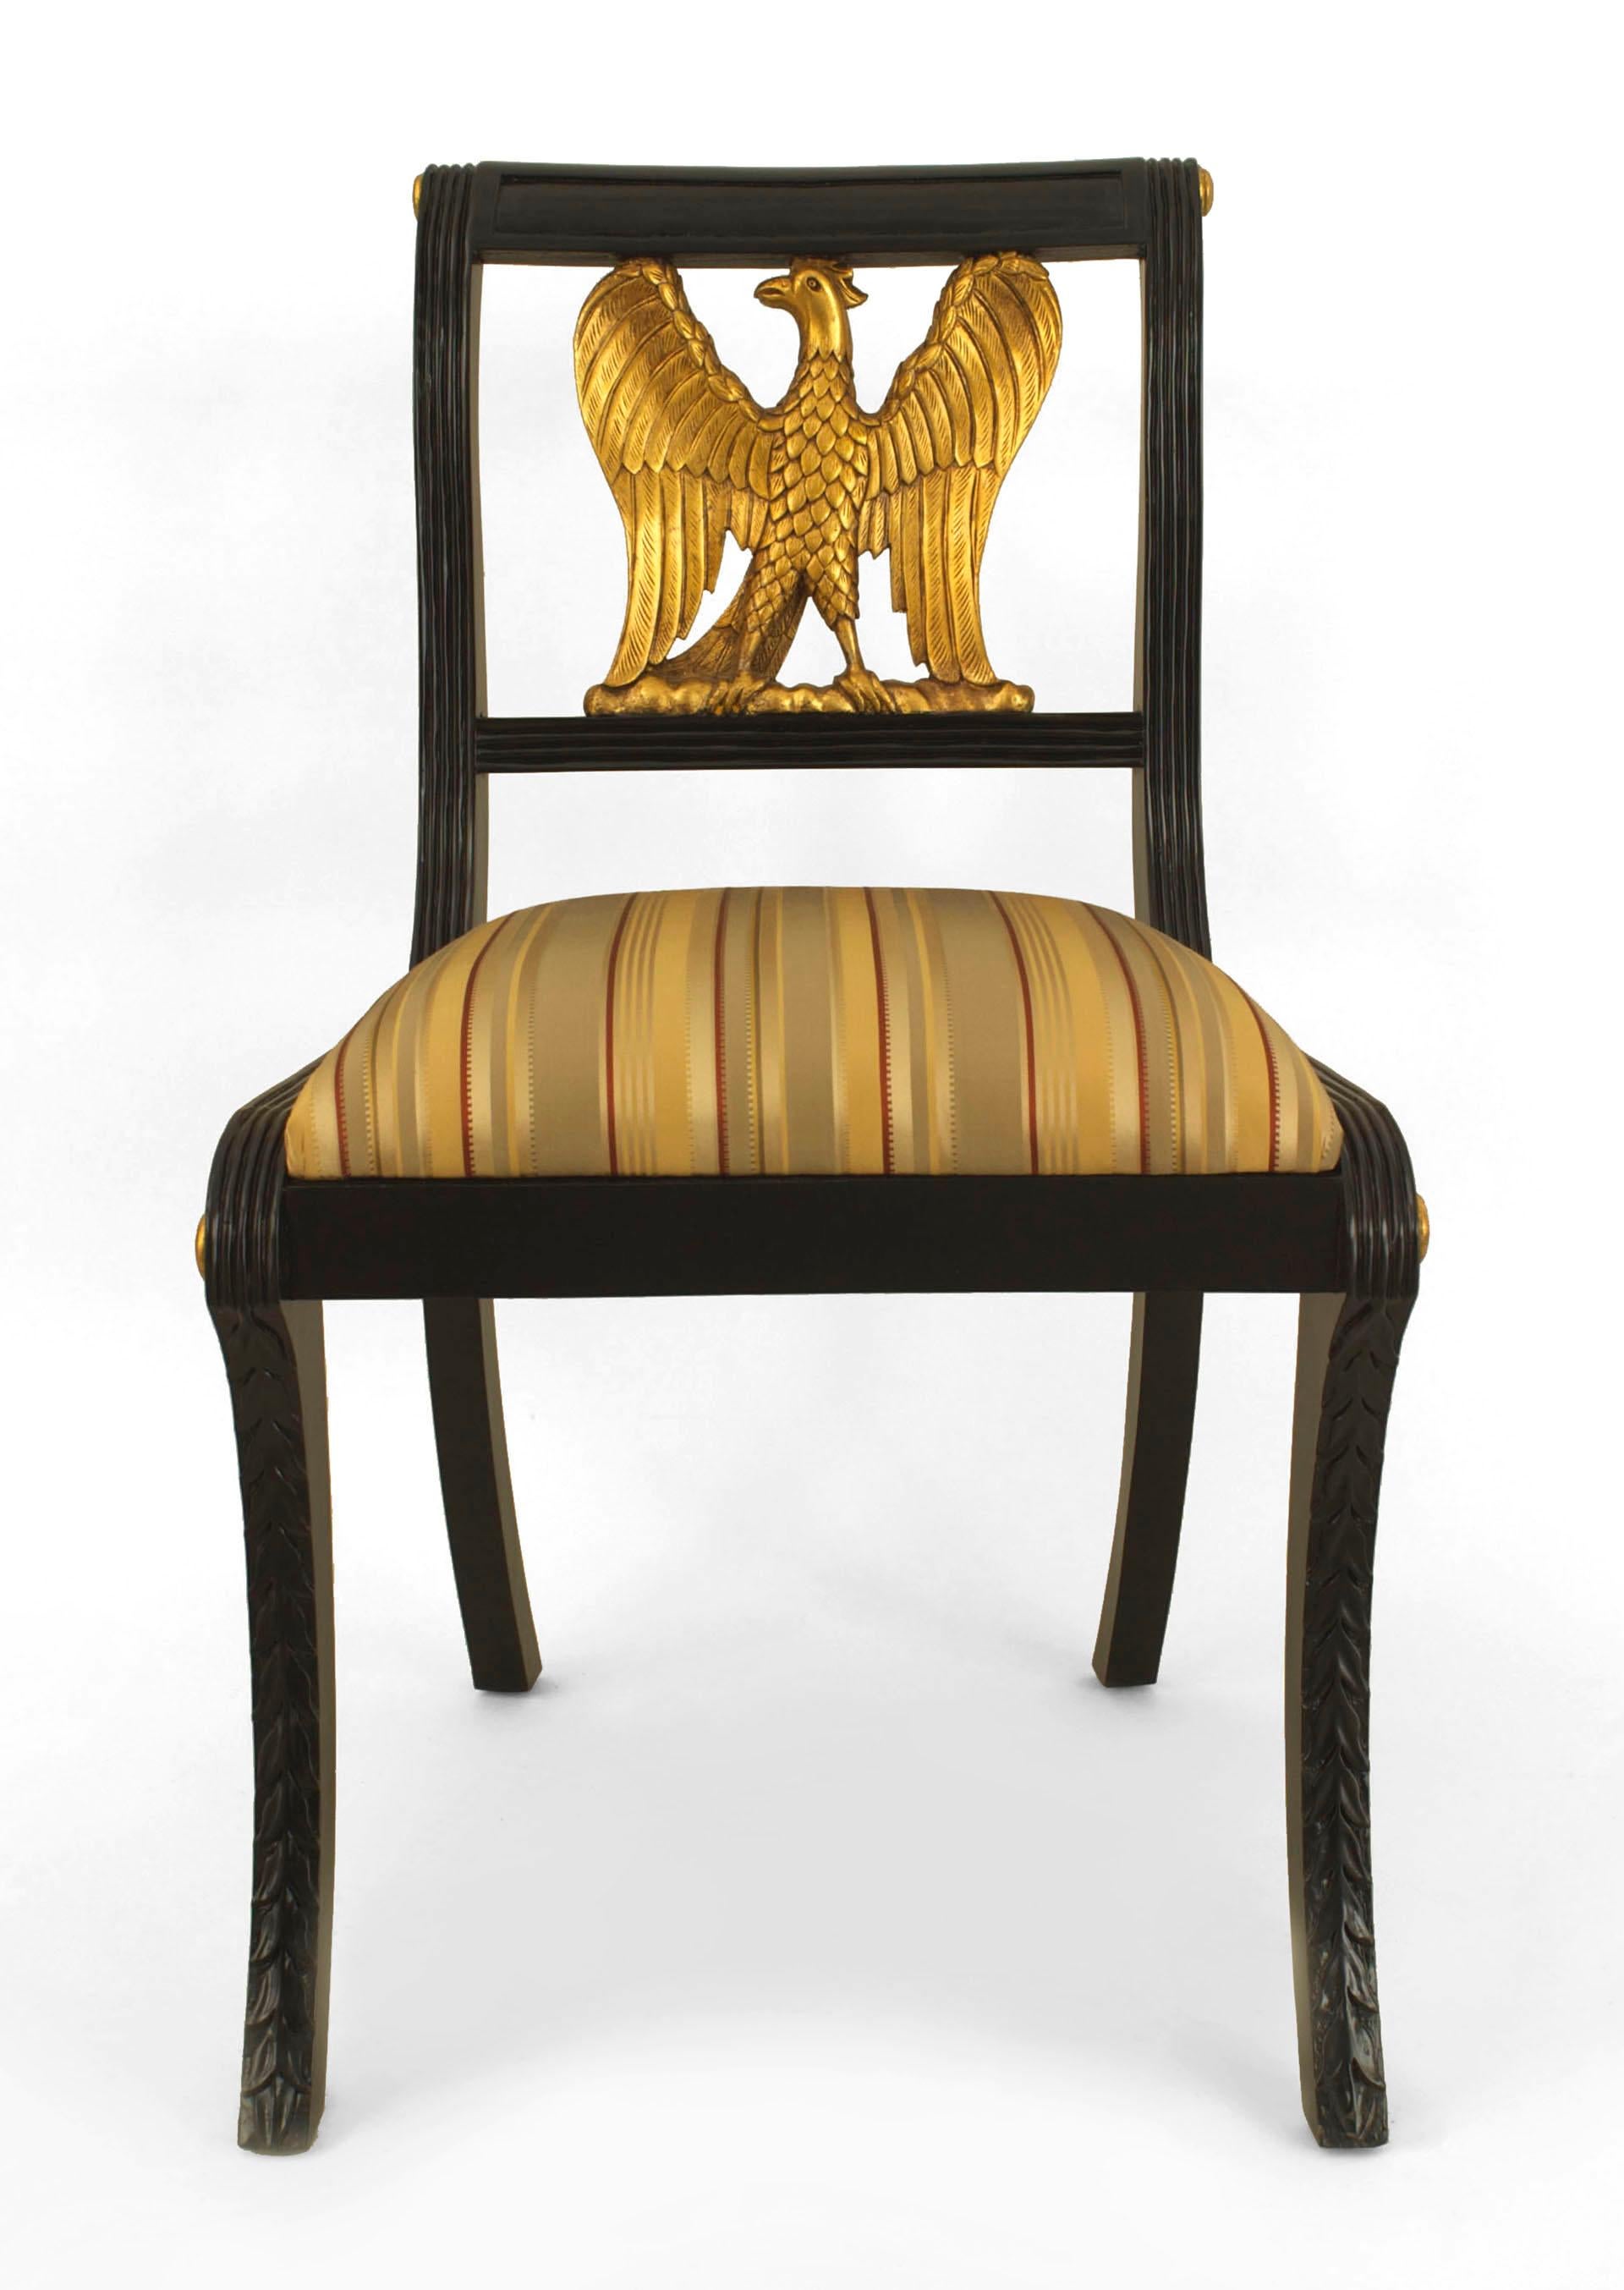 Set of 12 American Federal style (20th Cent) ebonized side chairs with fluted sides and a gilt carved eagle back with an upholstered seat.
